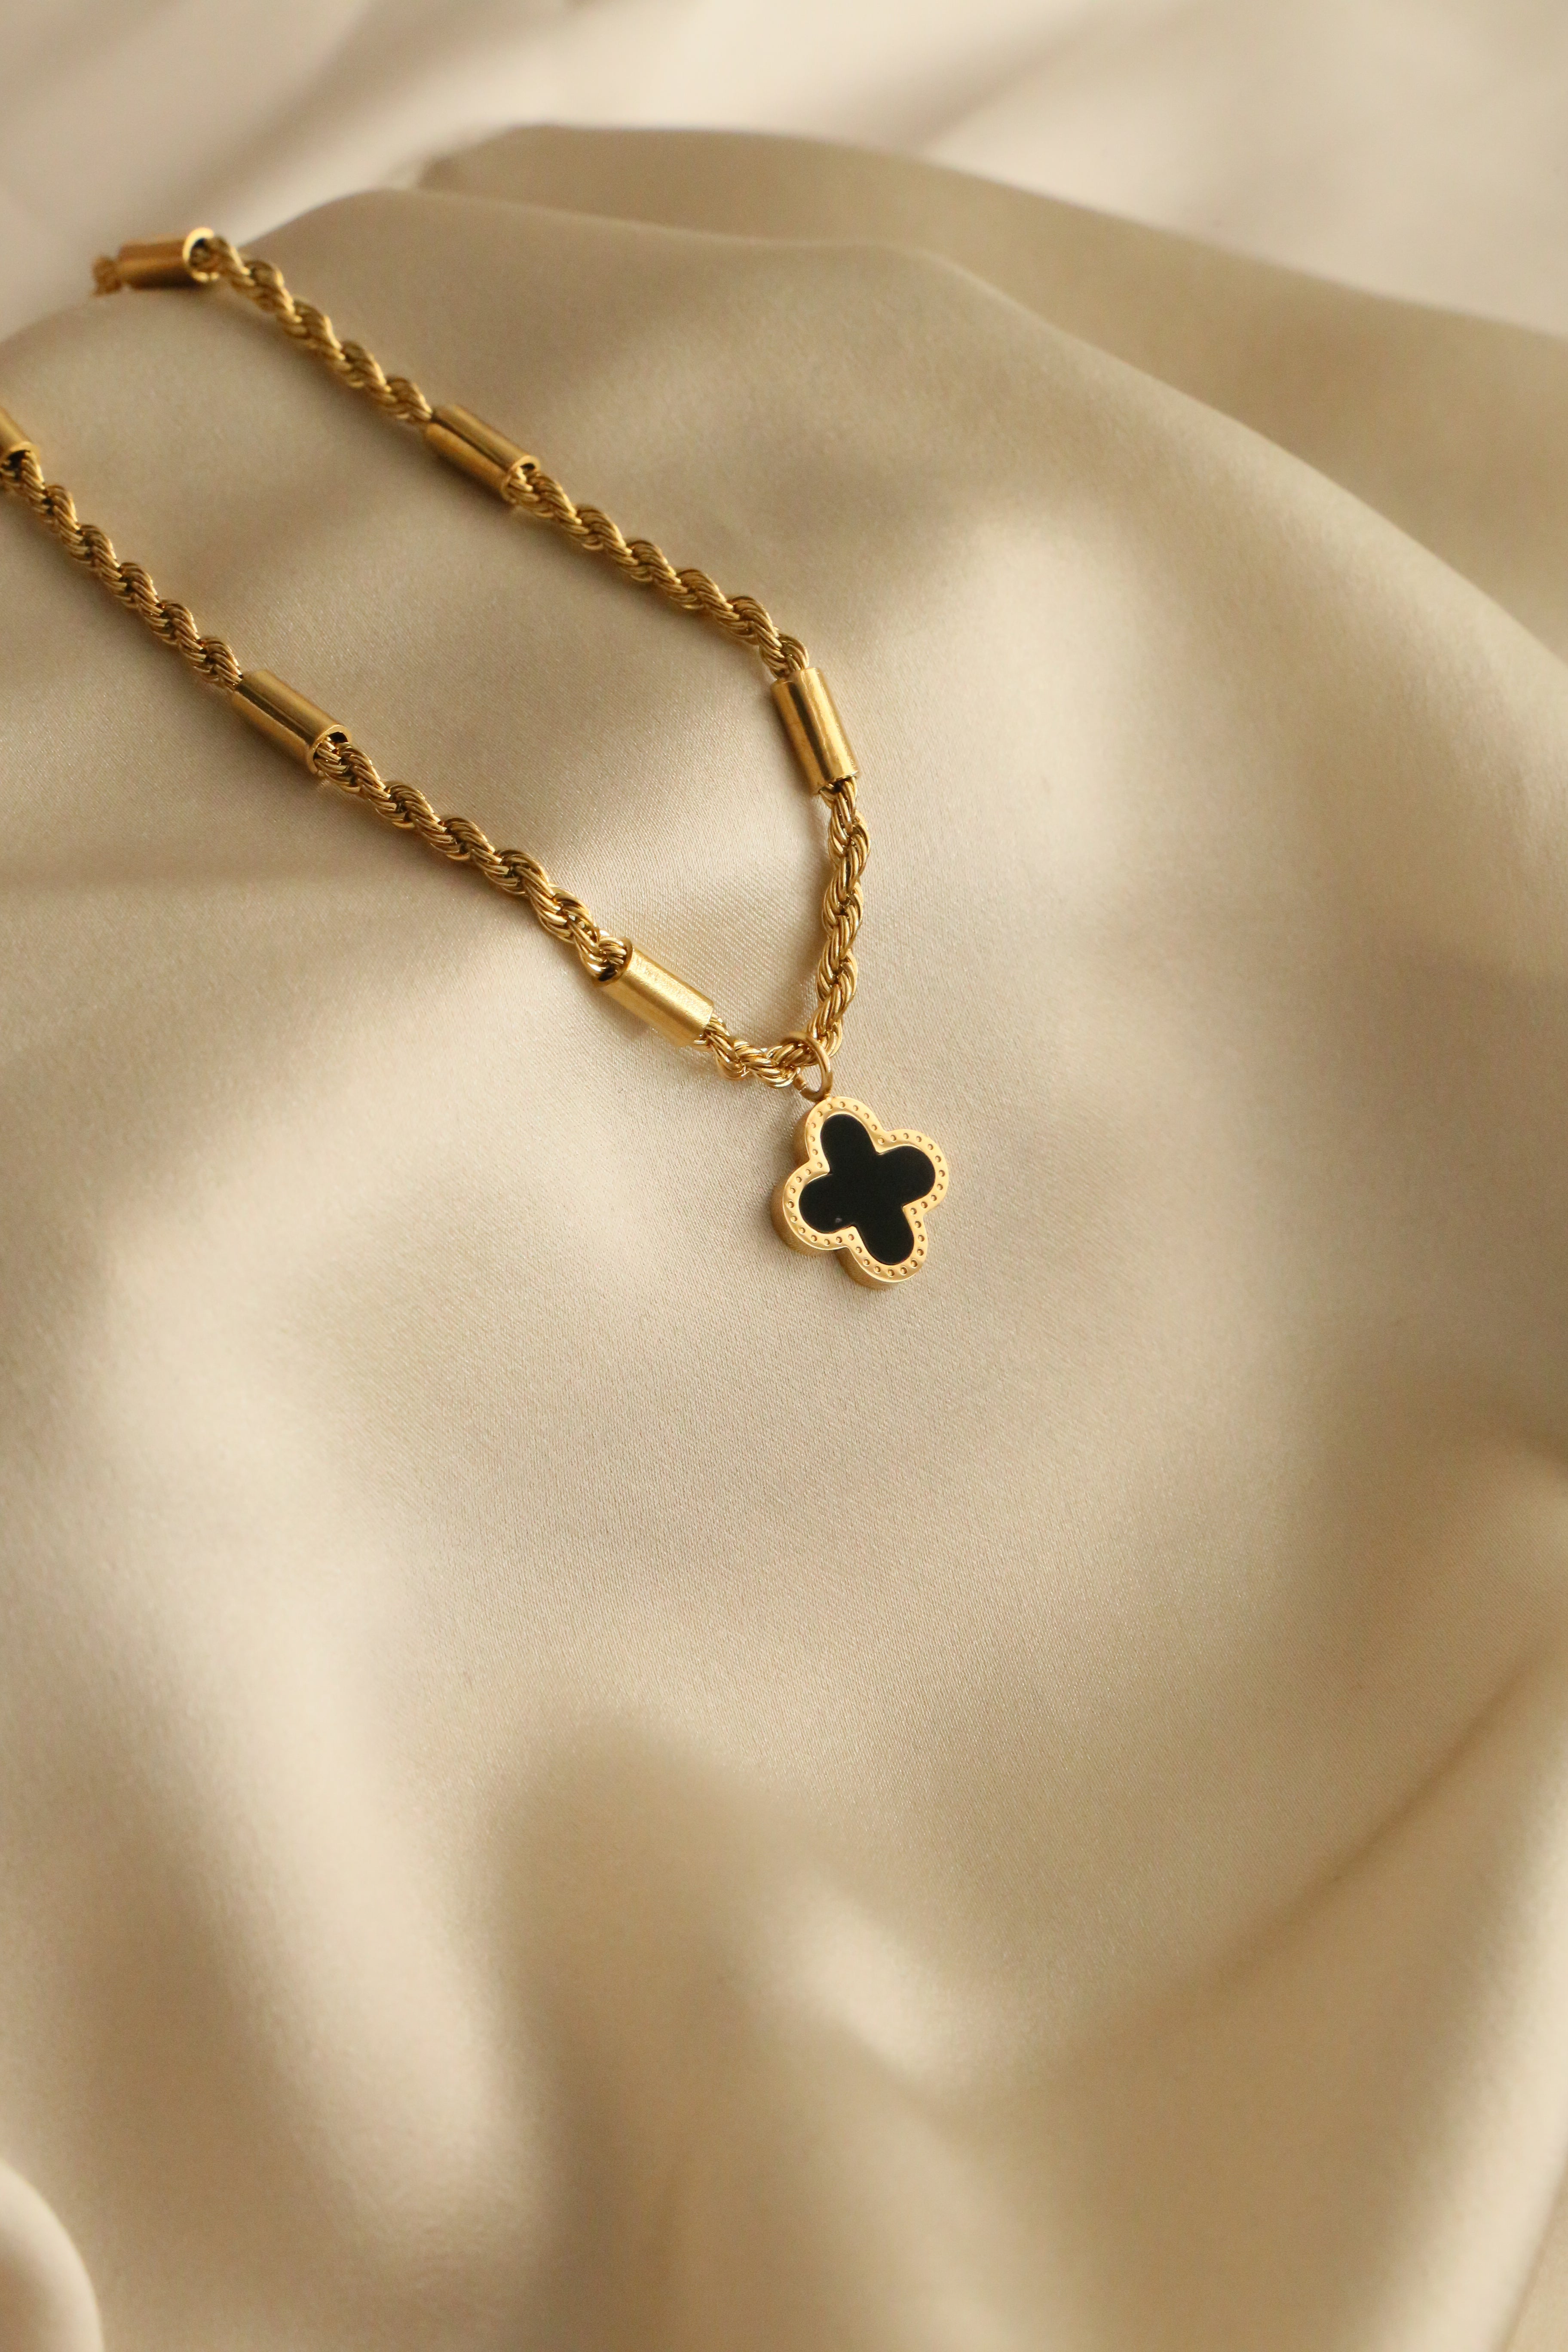 Petal Necklace - Boutique Minimaliste has waterproof, durable, elegant and vintage inspired jewelry